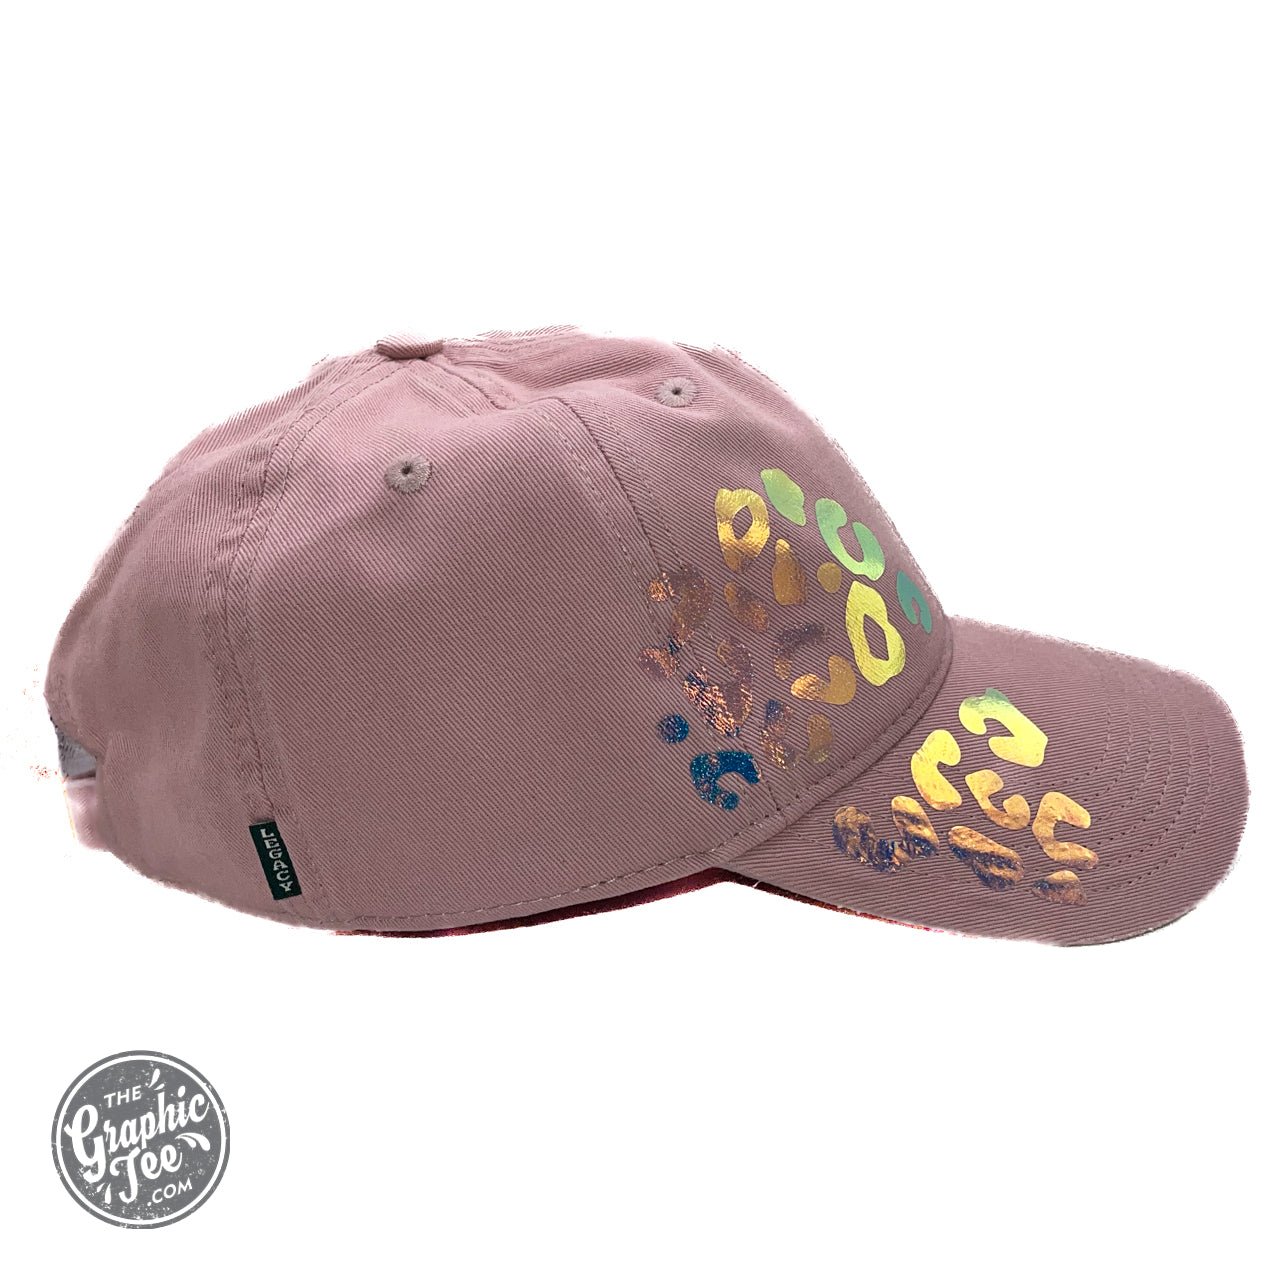 Leopard Bling Dusty Rose Cap - The Graphic Tee